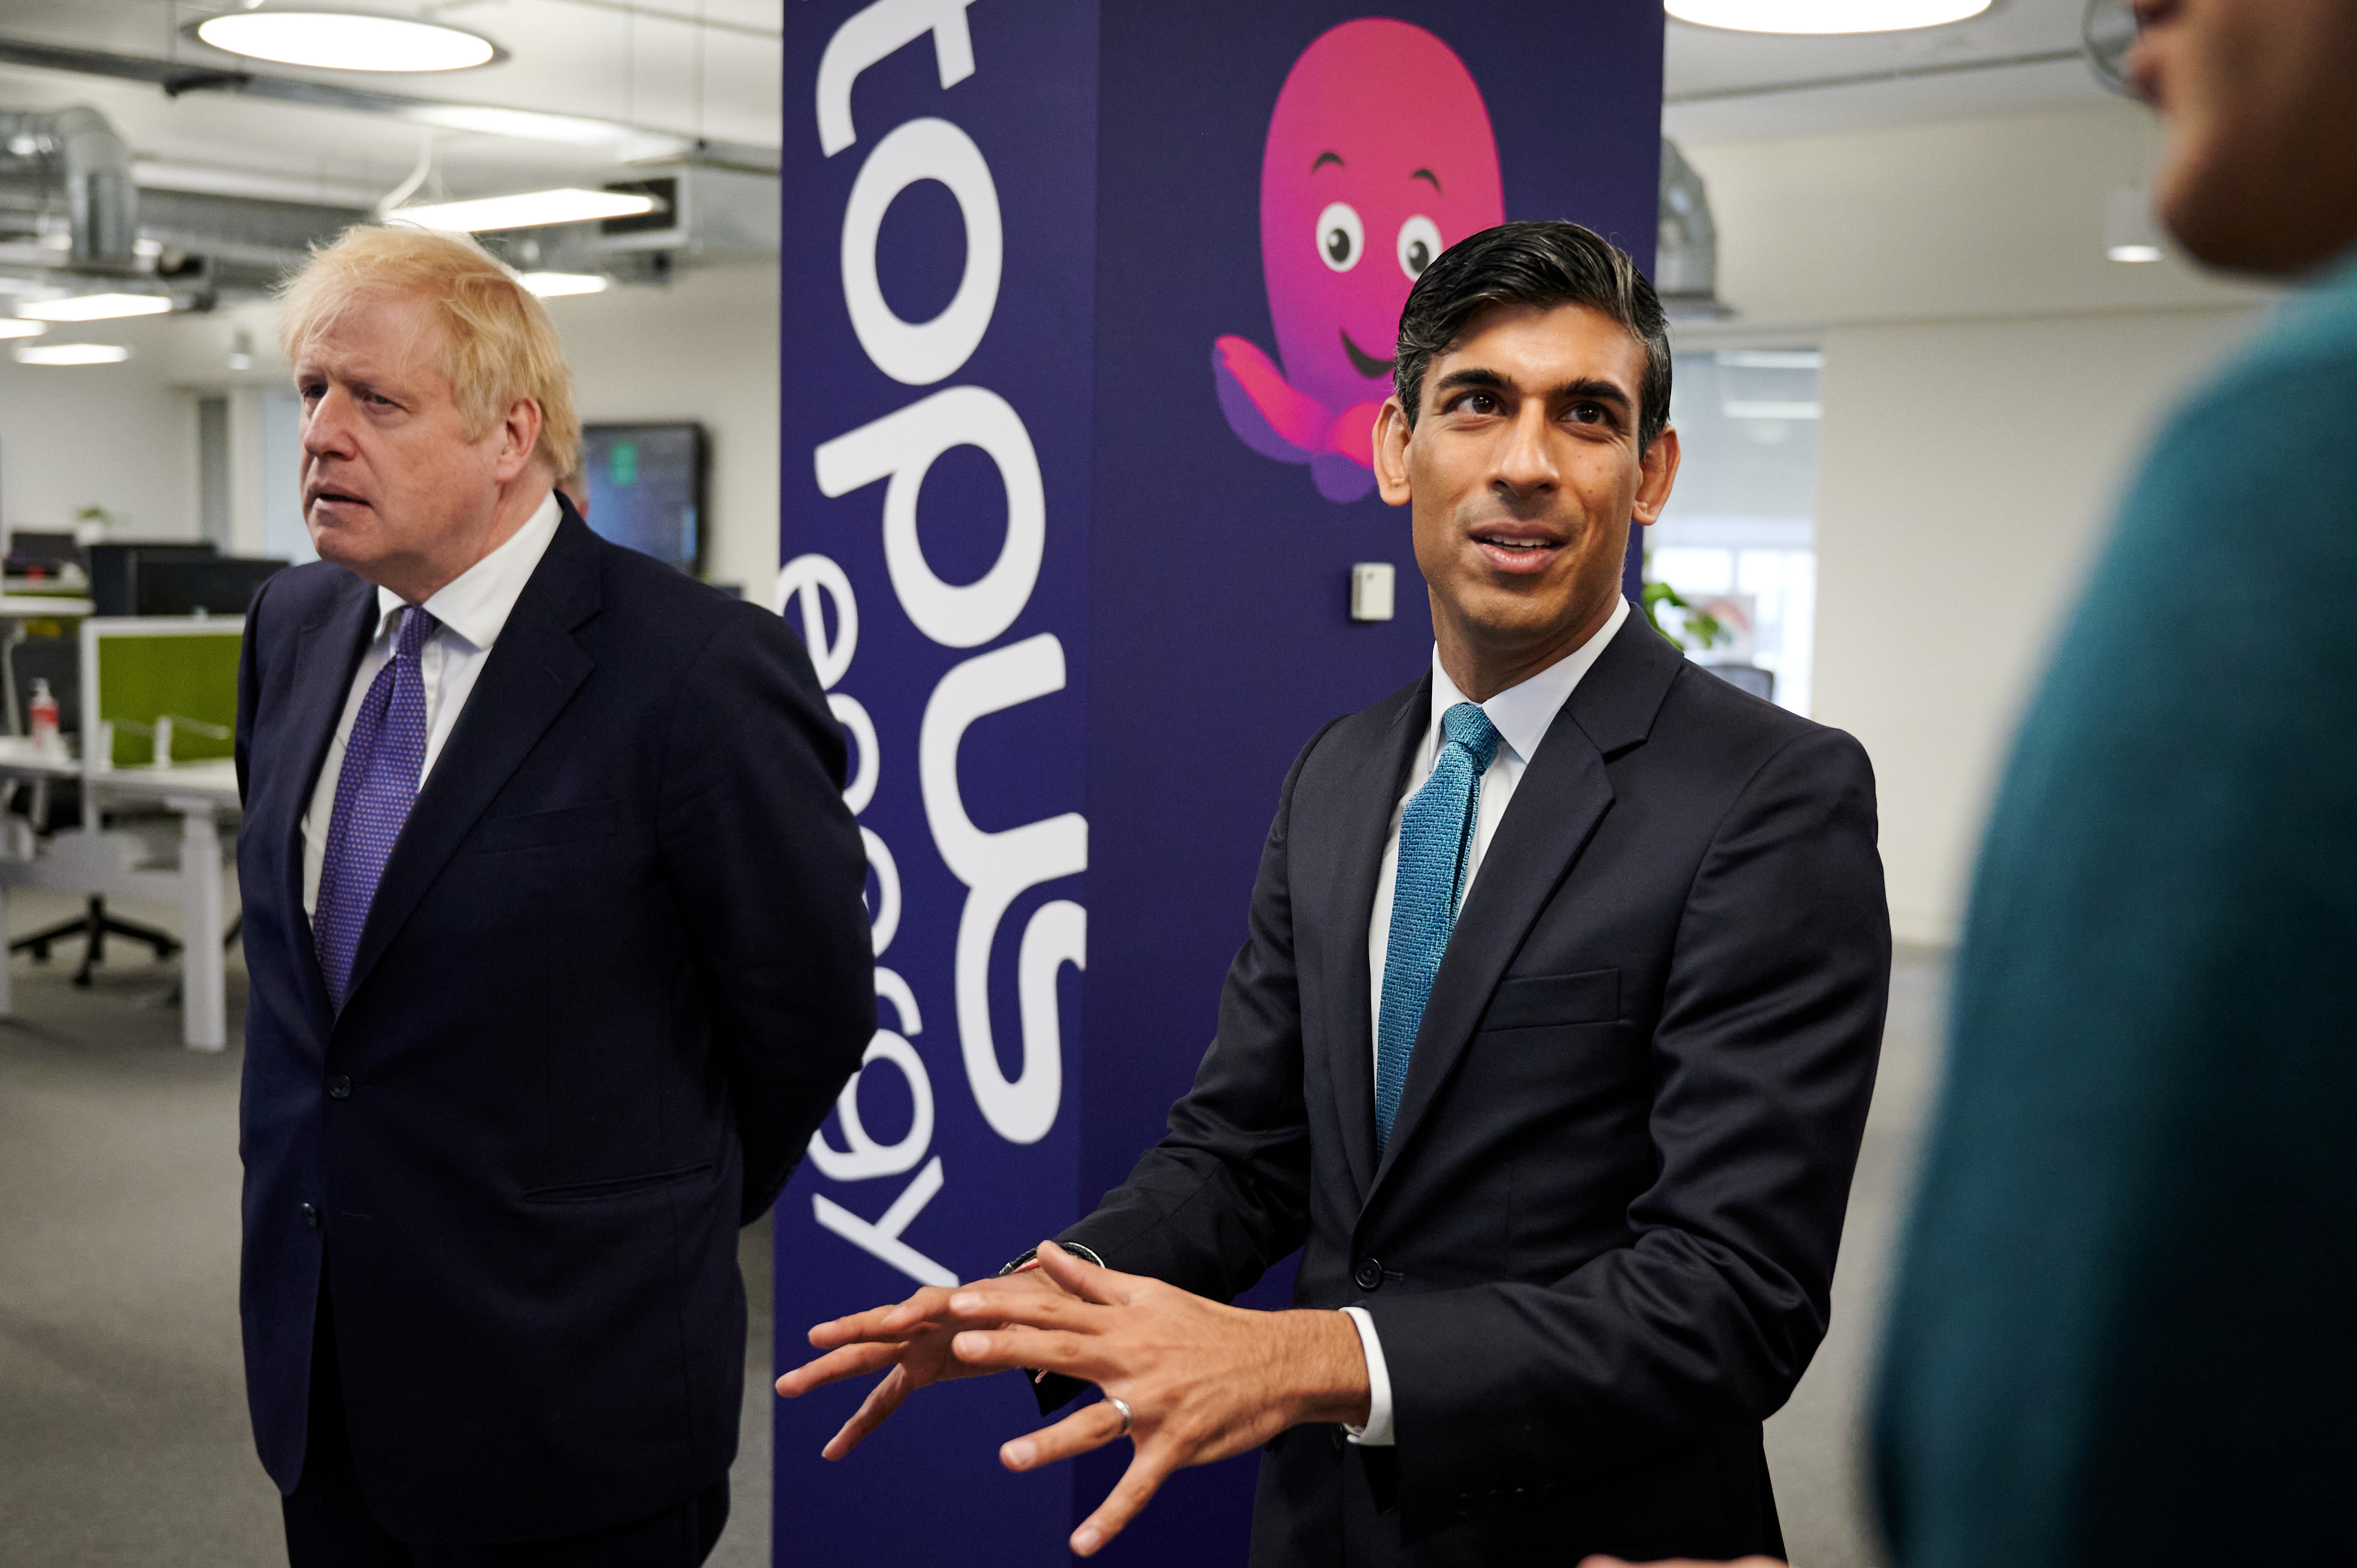 Britain's PM Johnson and Chancellor of the Exchequer Sunak visit Octopus Energy, in London